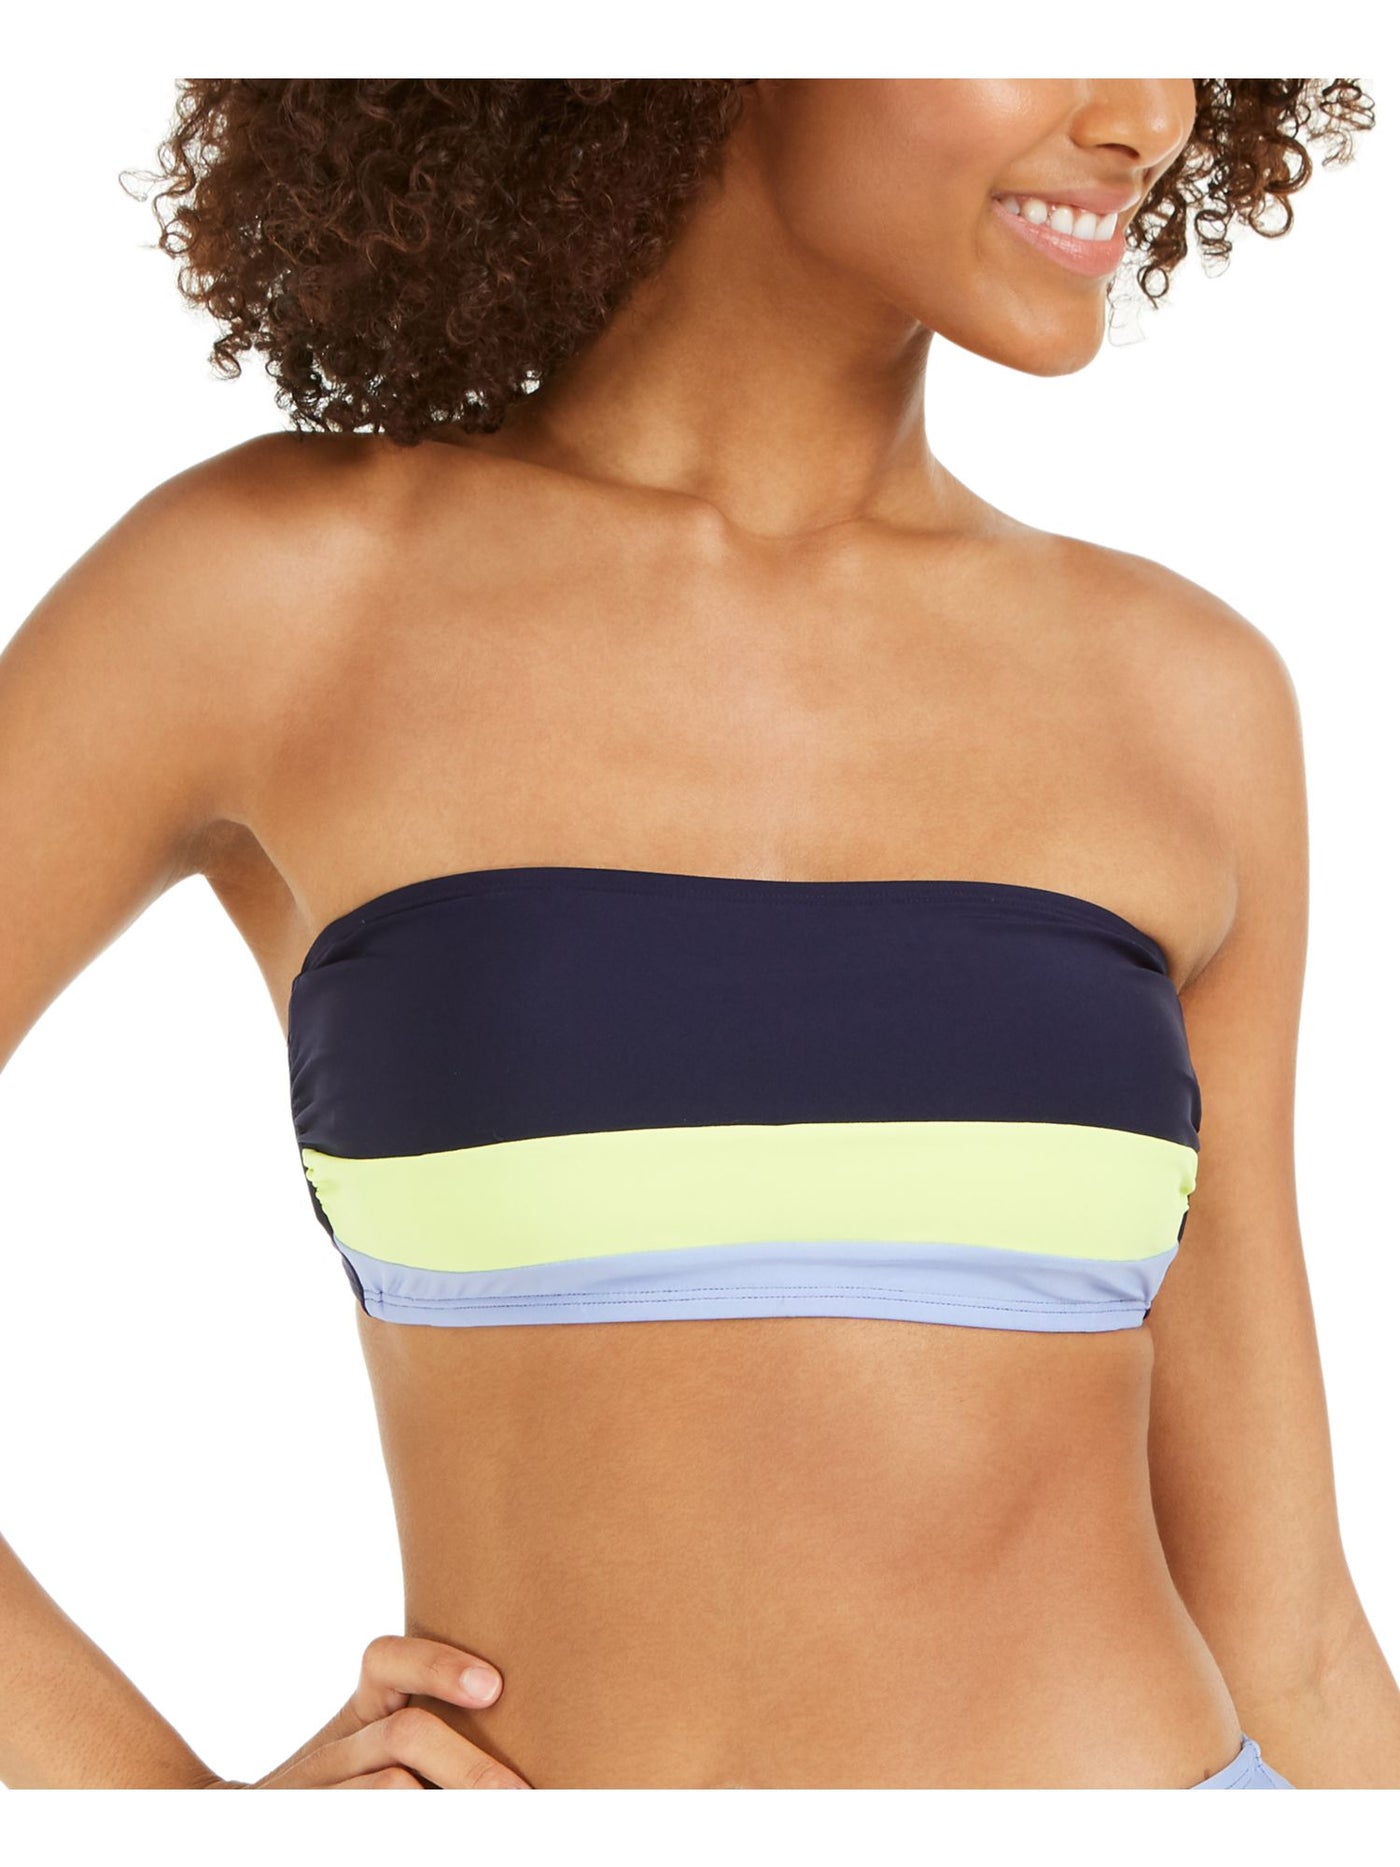 DKNY Women's Navy Color Block Stretch Removable Cups Lined Convertible Bandeau Swimsuit Top XXL